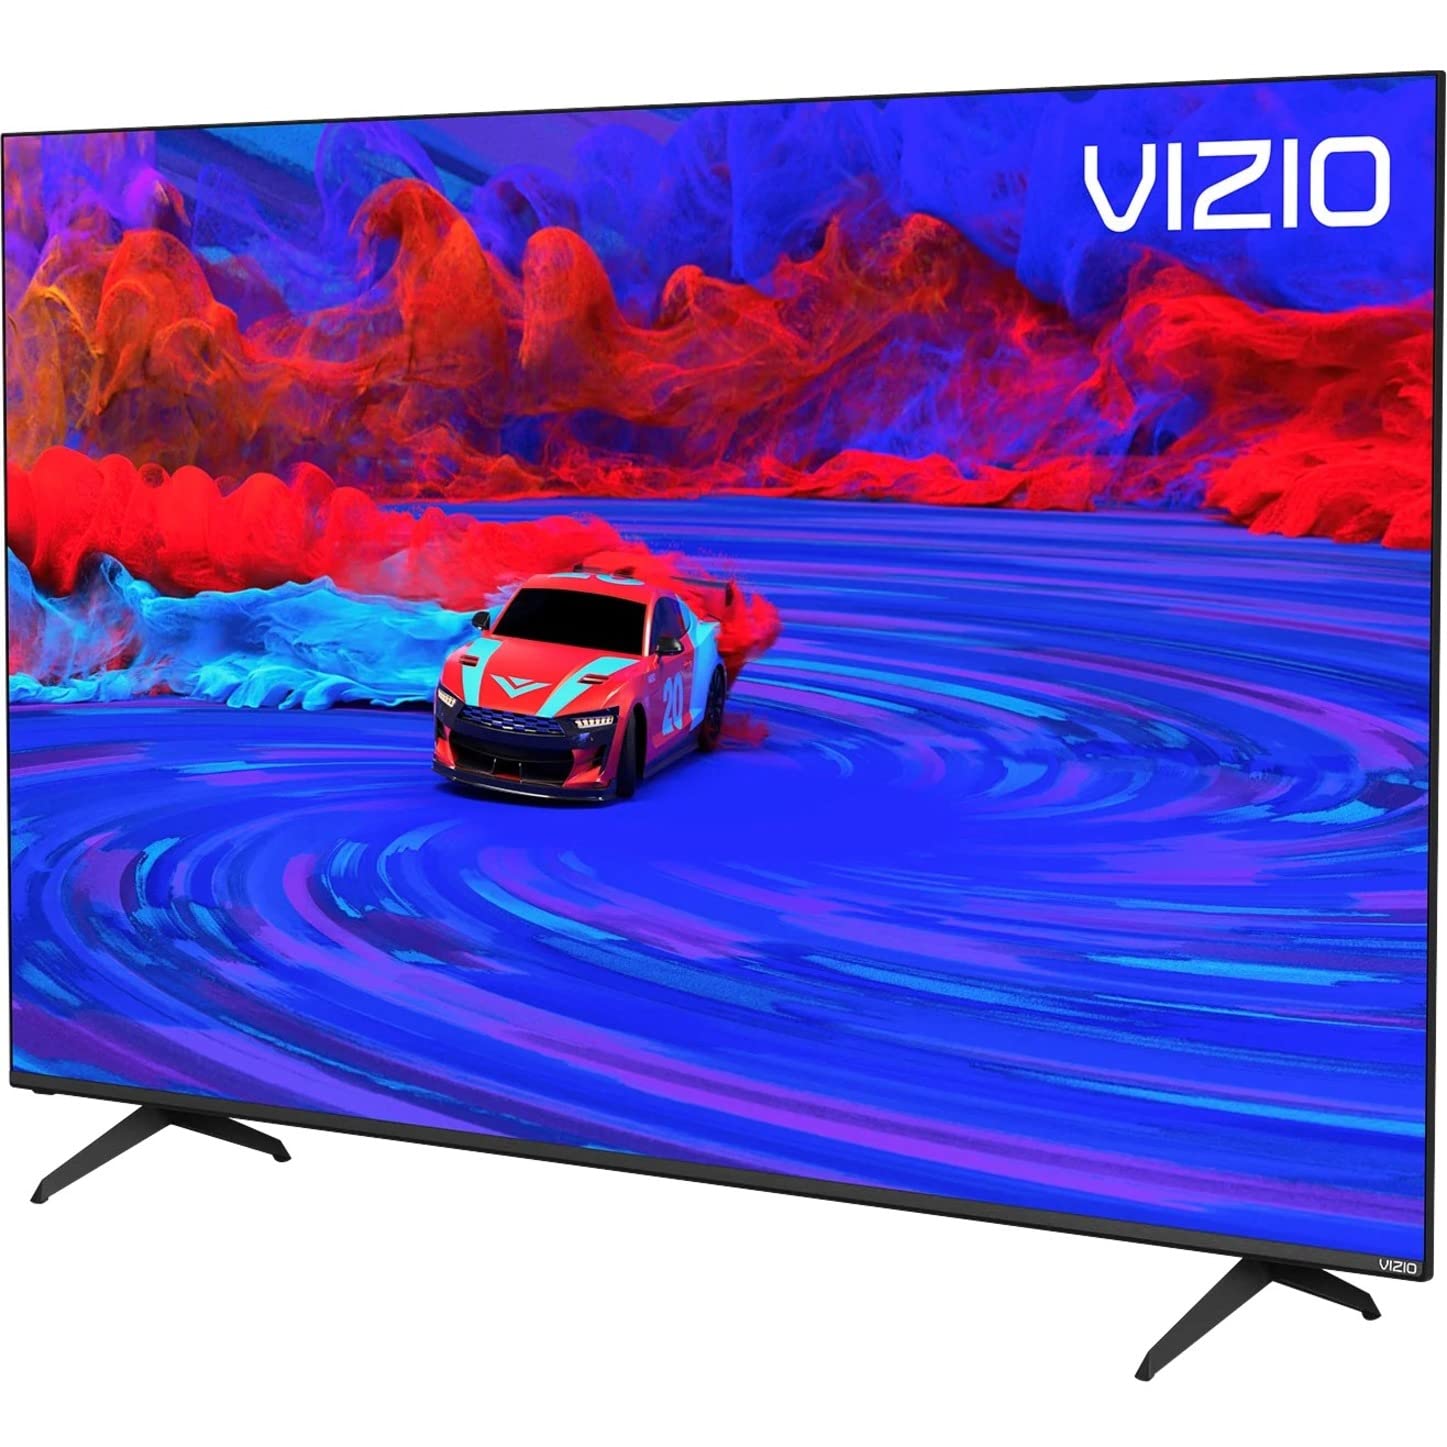 VIZIO 65-Inch M-Series 4K QLED HDR Smart TV with Voice Remote, Dolby Vision, HDR10+, Alexa Compatibility, VRR with AMD FreeSync, M65Q6-J09, 2022 Model